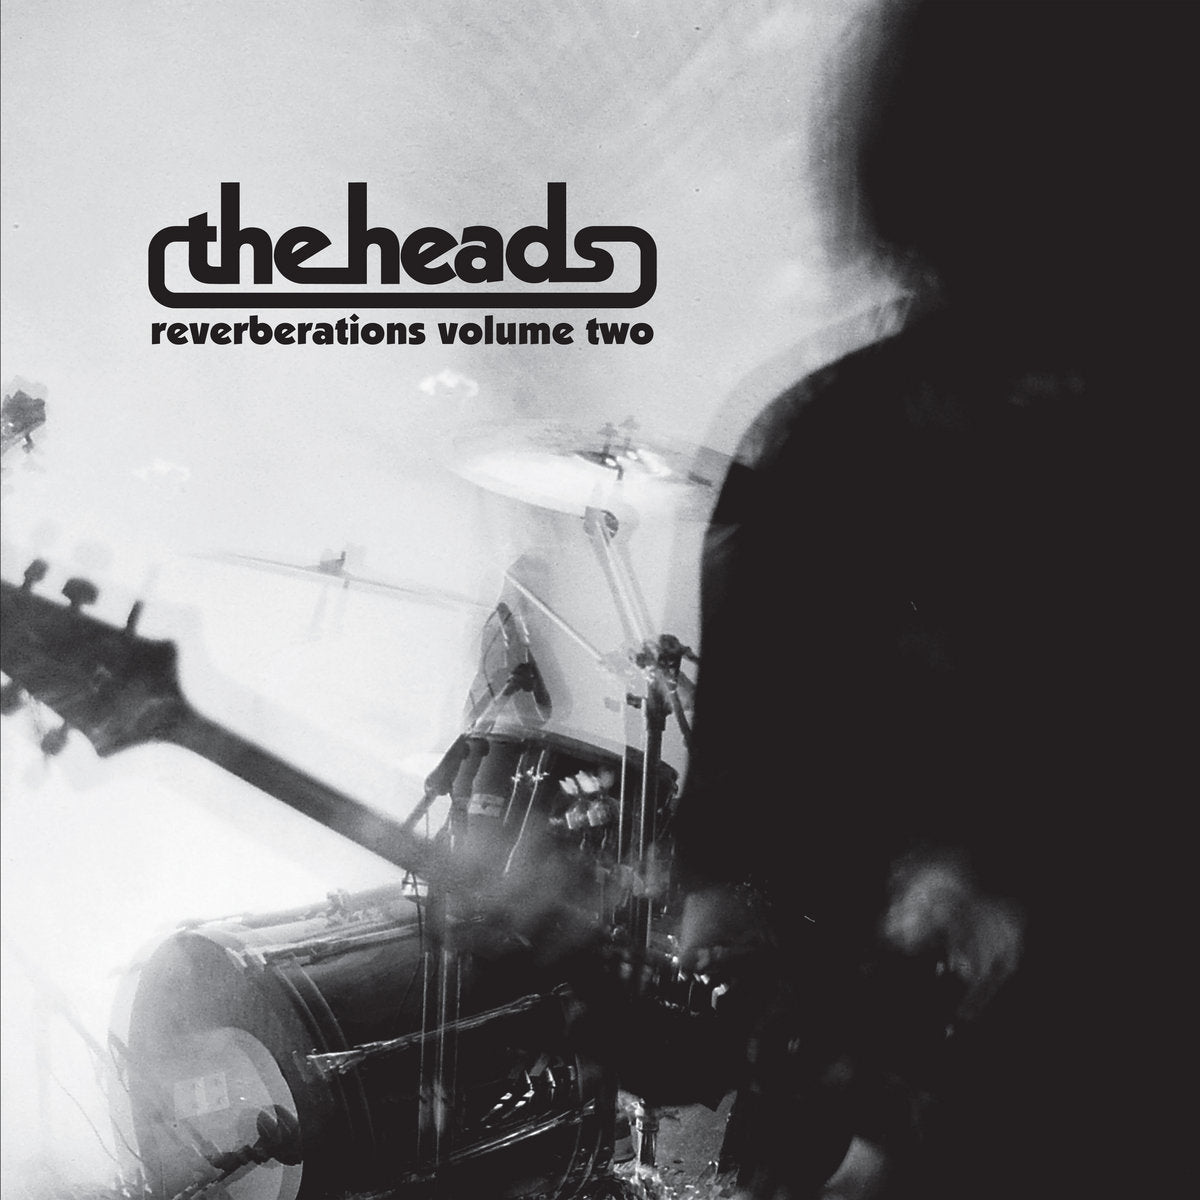 Arcade Sound - The Heads - Reverberations Vol. 2 - LP front cover